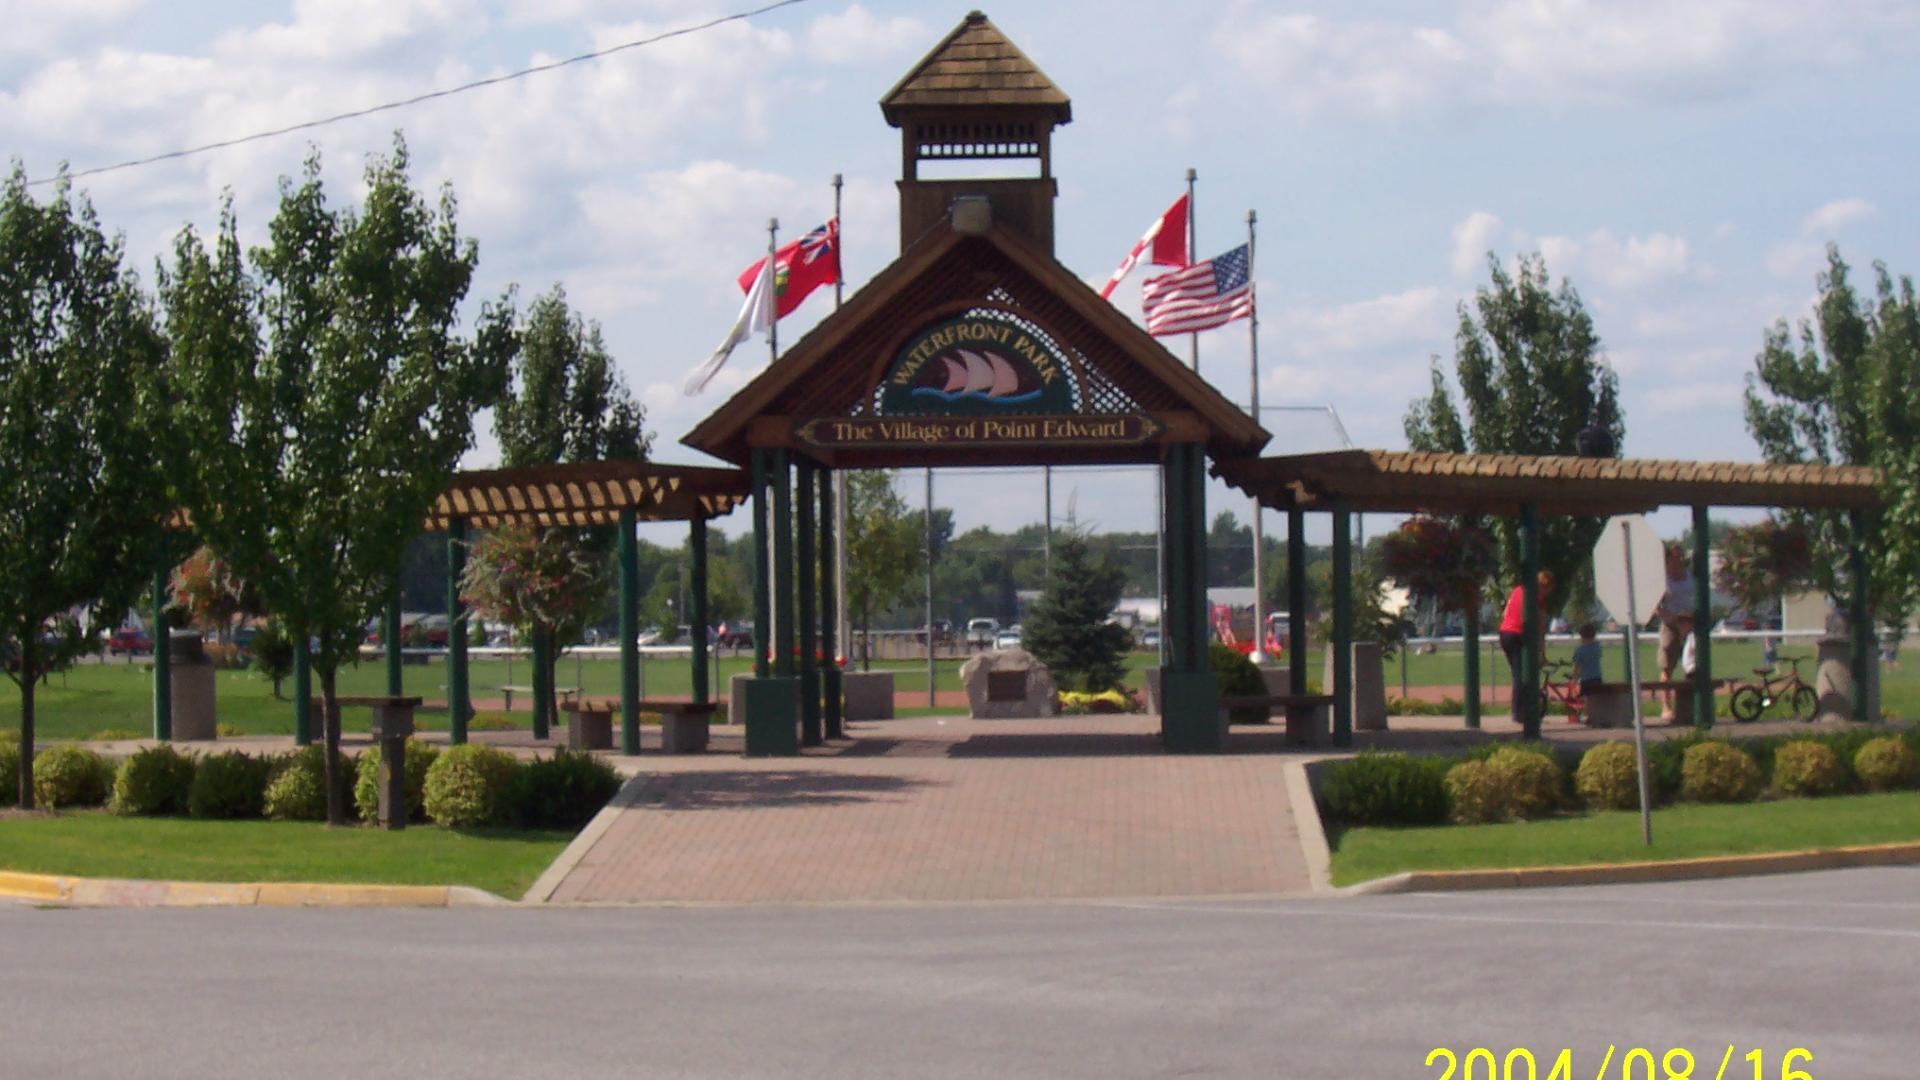 Waterfron park entrance for Point Edward. There are flags flying on flagpole in the background.